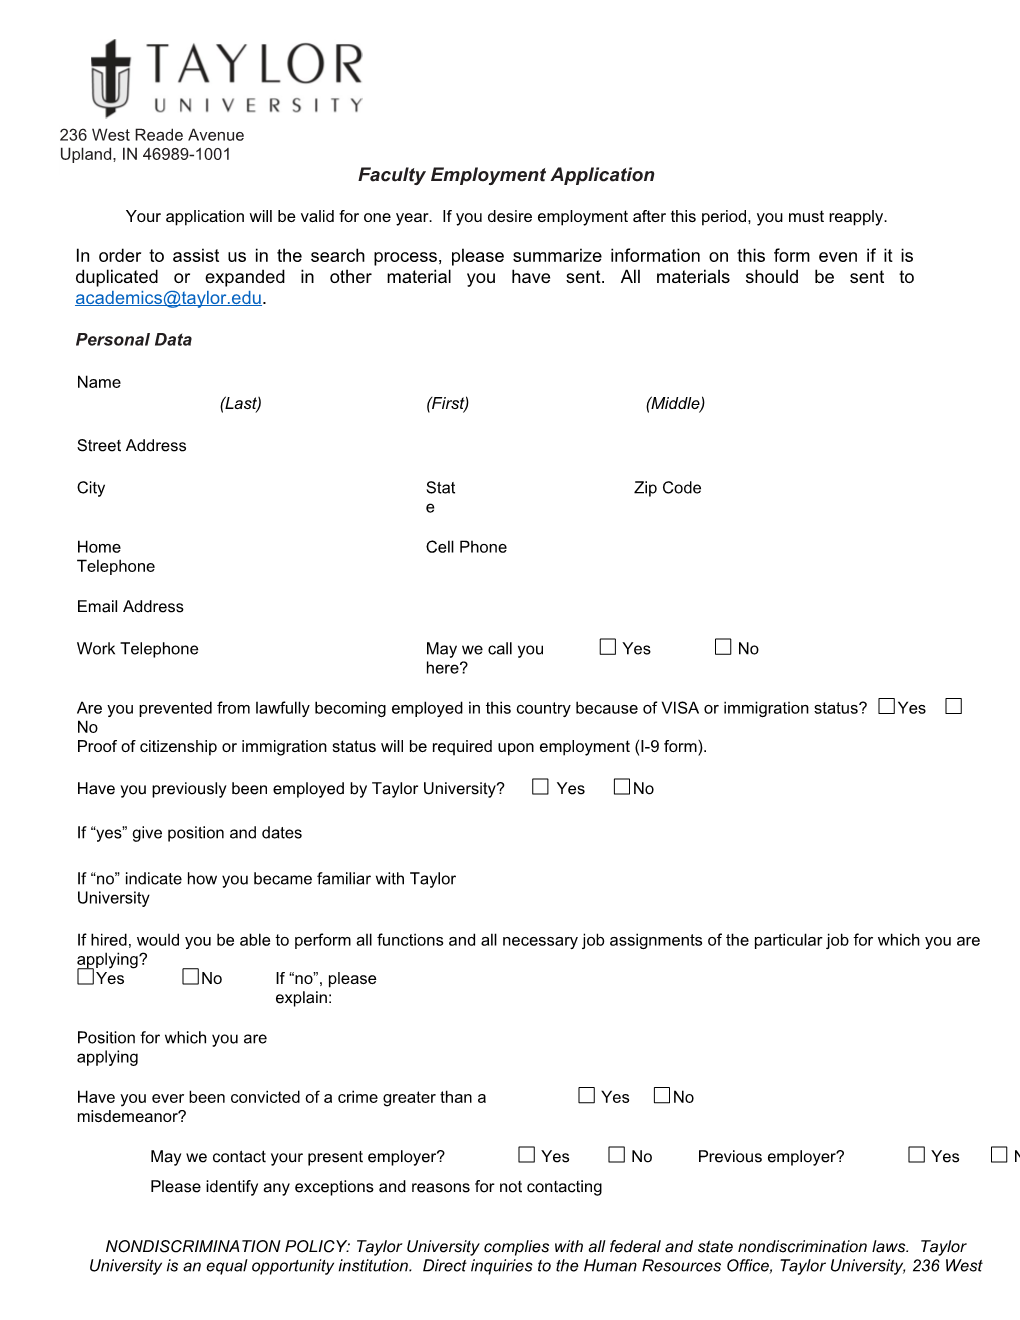 Faculty Employment Application